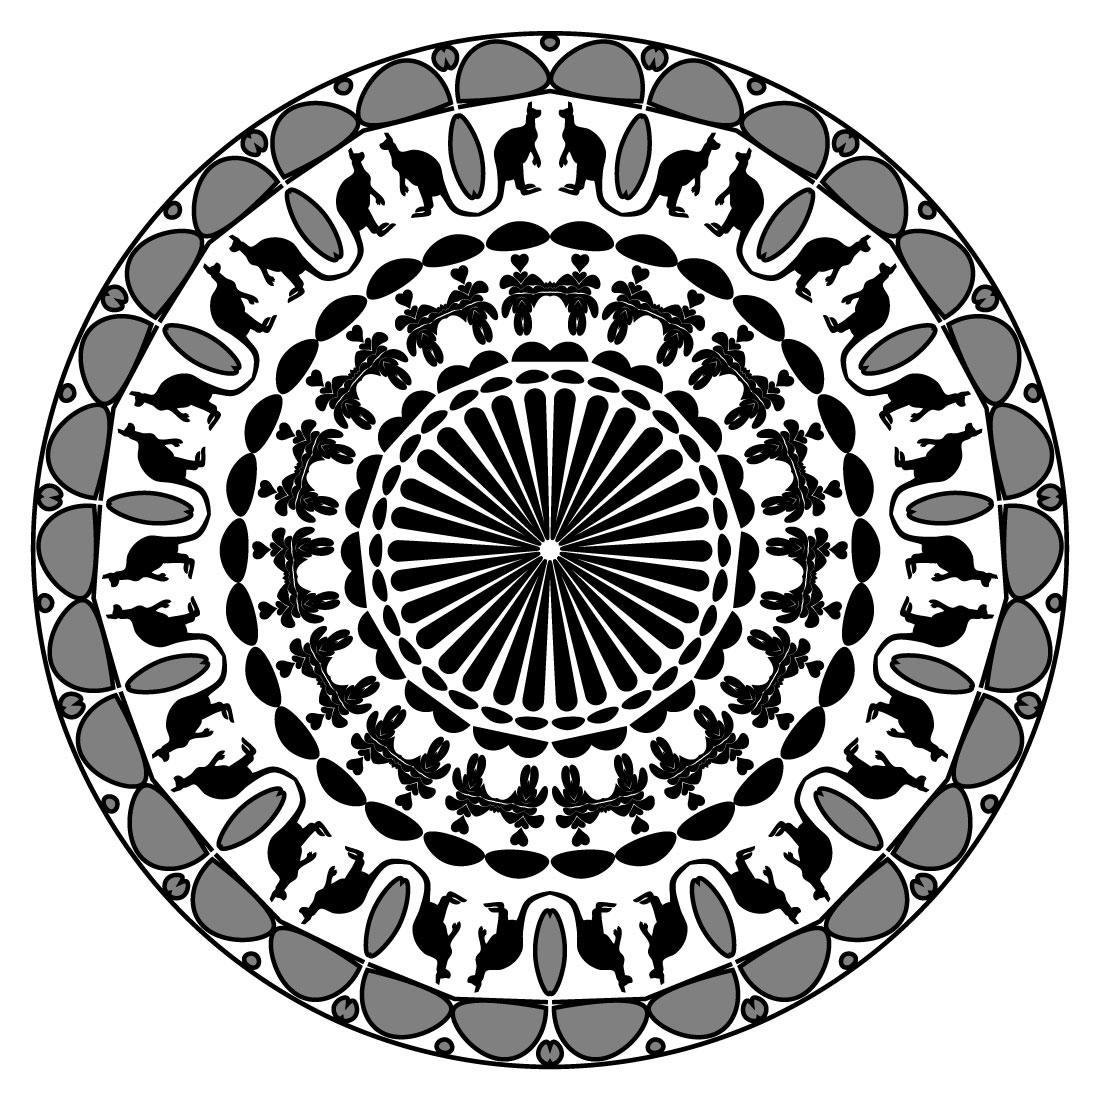 Mandala Art with Kangaroo in Black and White preview image.